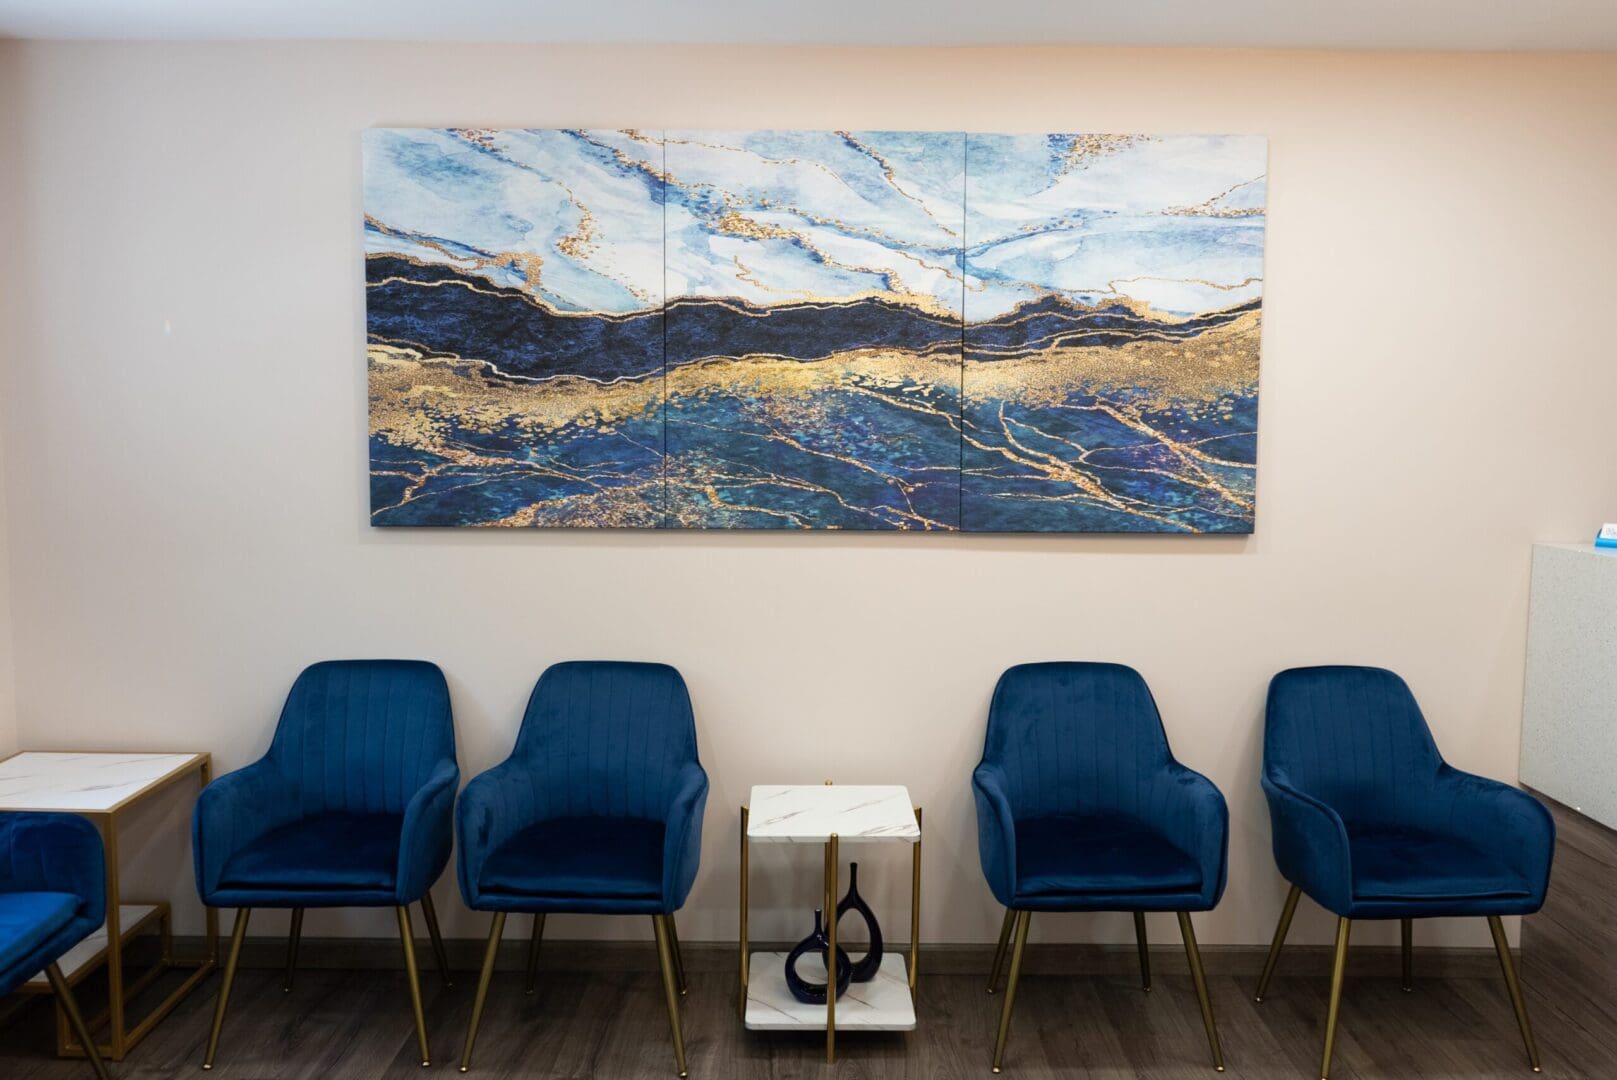 A group of blue chairs in front of a painting.